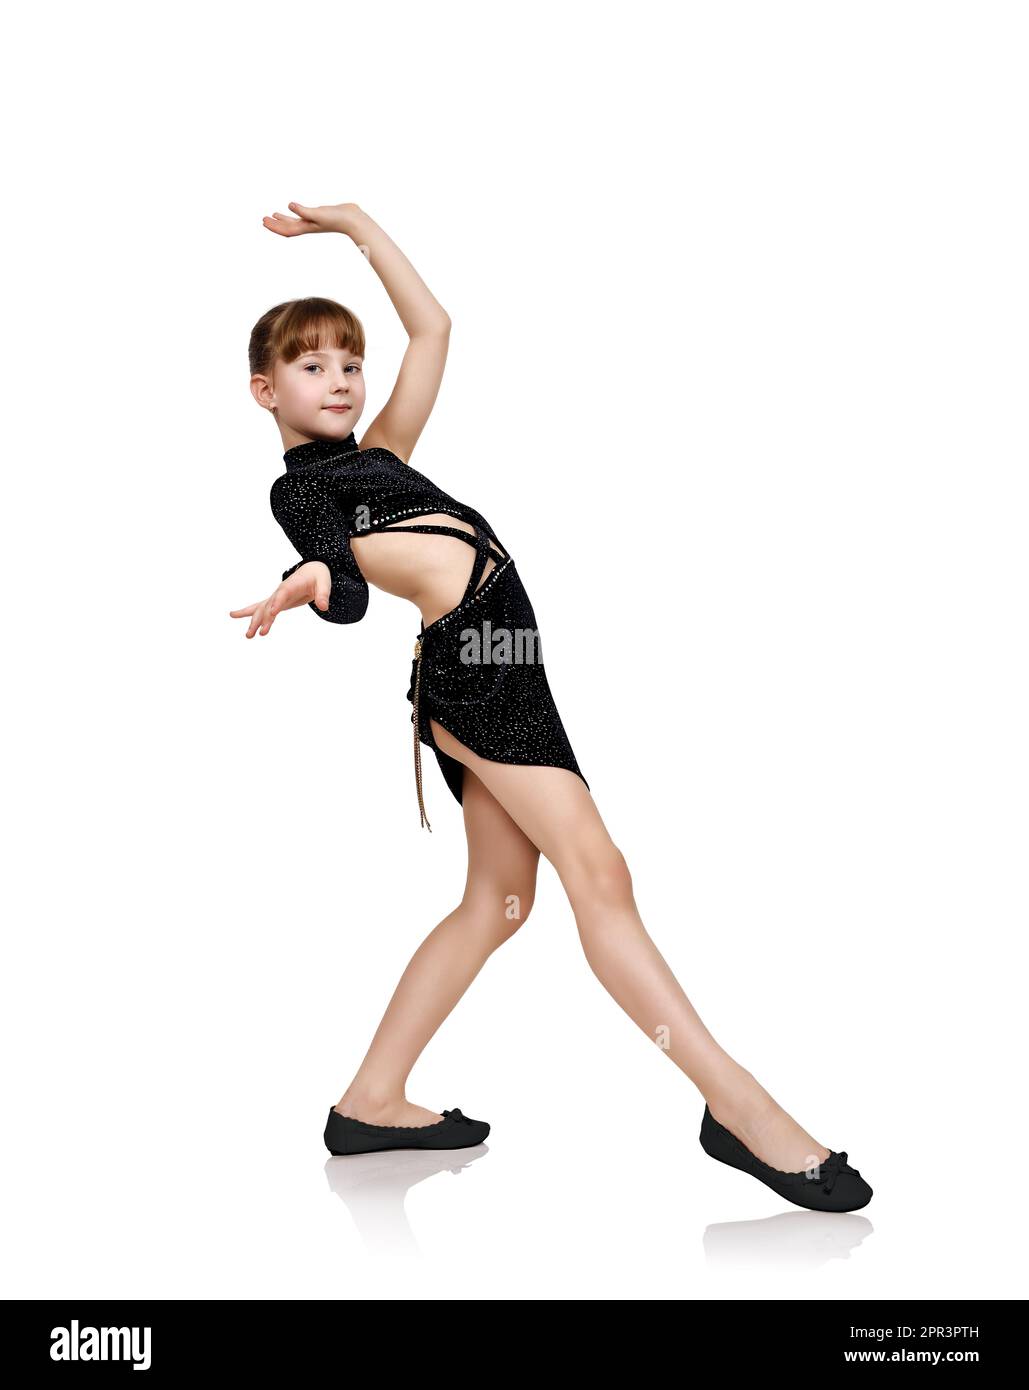 Young girl dancing on a white background Stock Photo